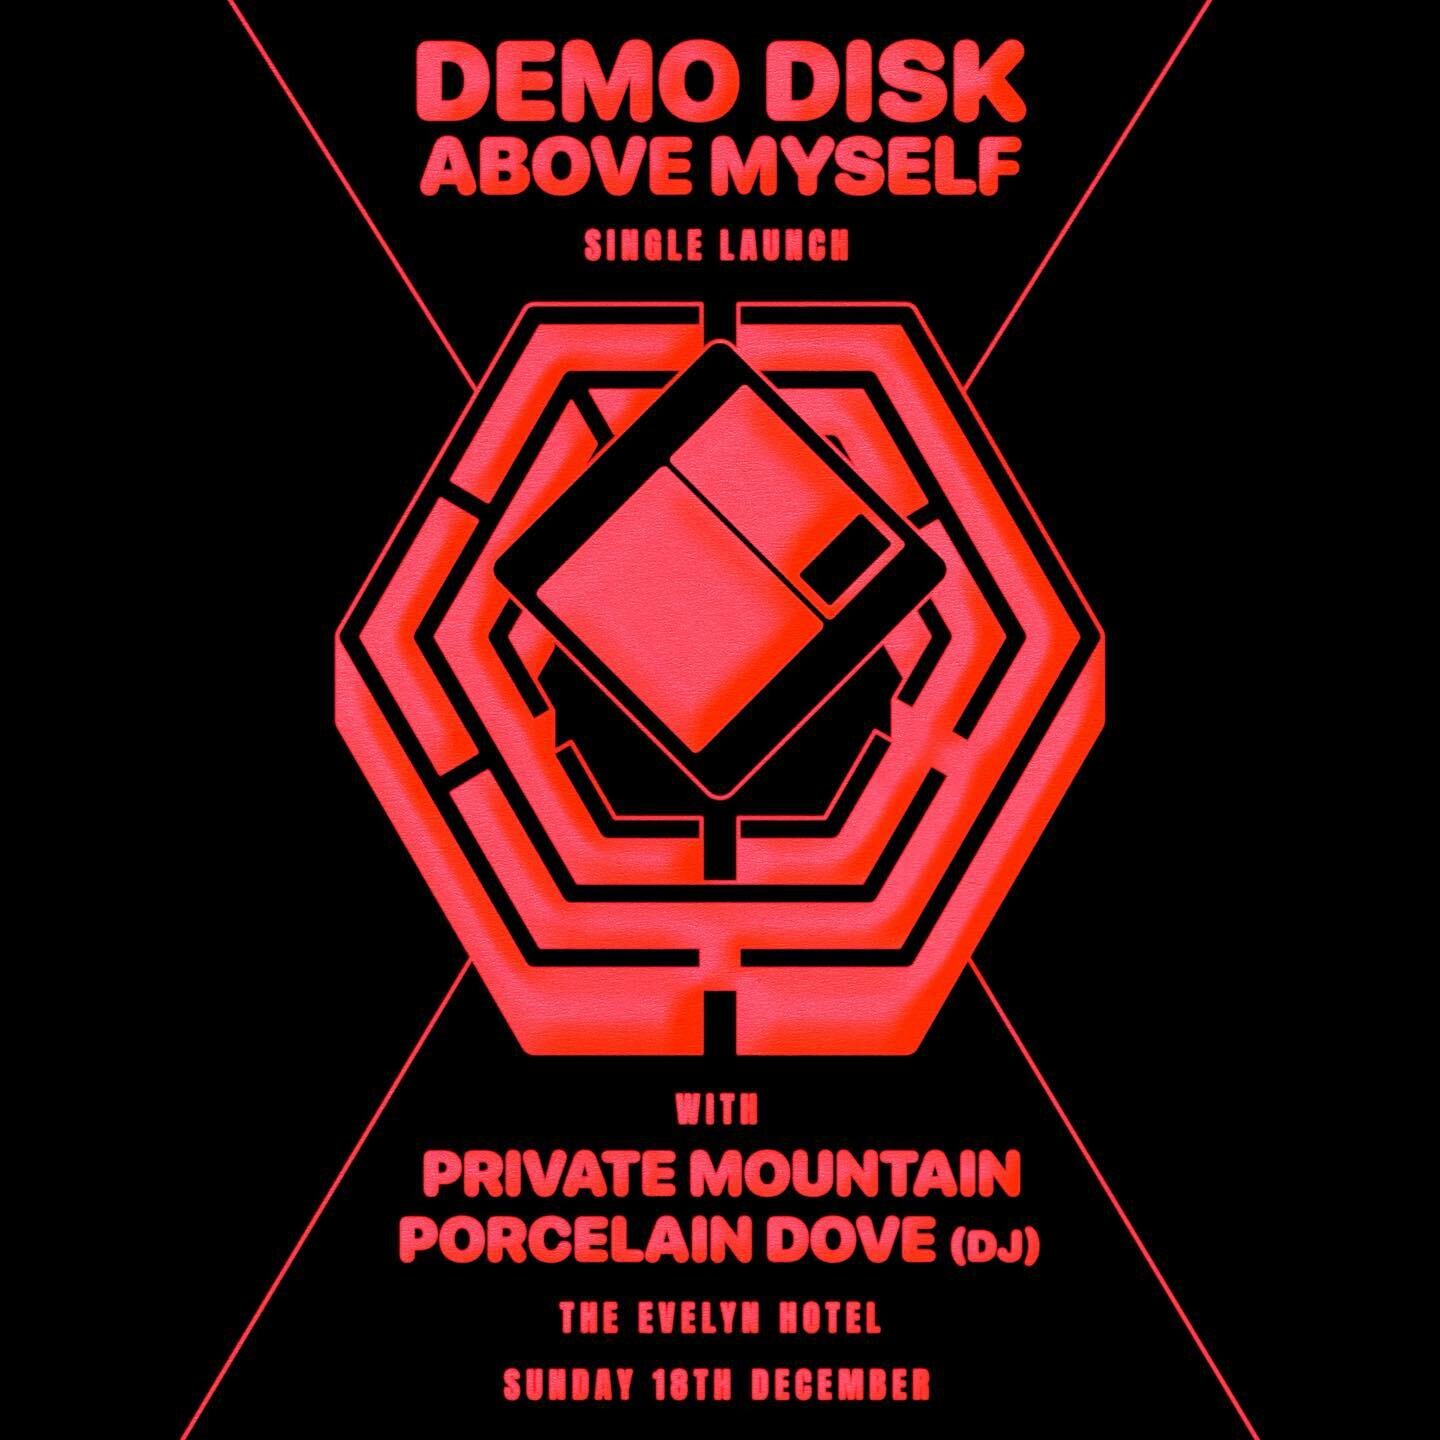 Still time to grab some tix to see @demodisk64 @private.mountain and @porcelain_dove at the @theevelynhotel this Sunday night! Link in bio 🎟️